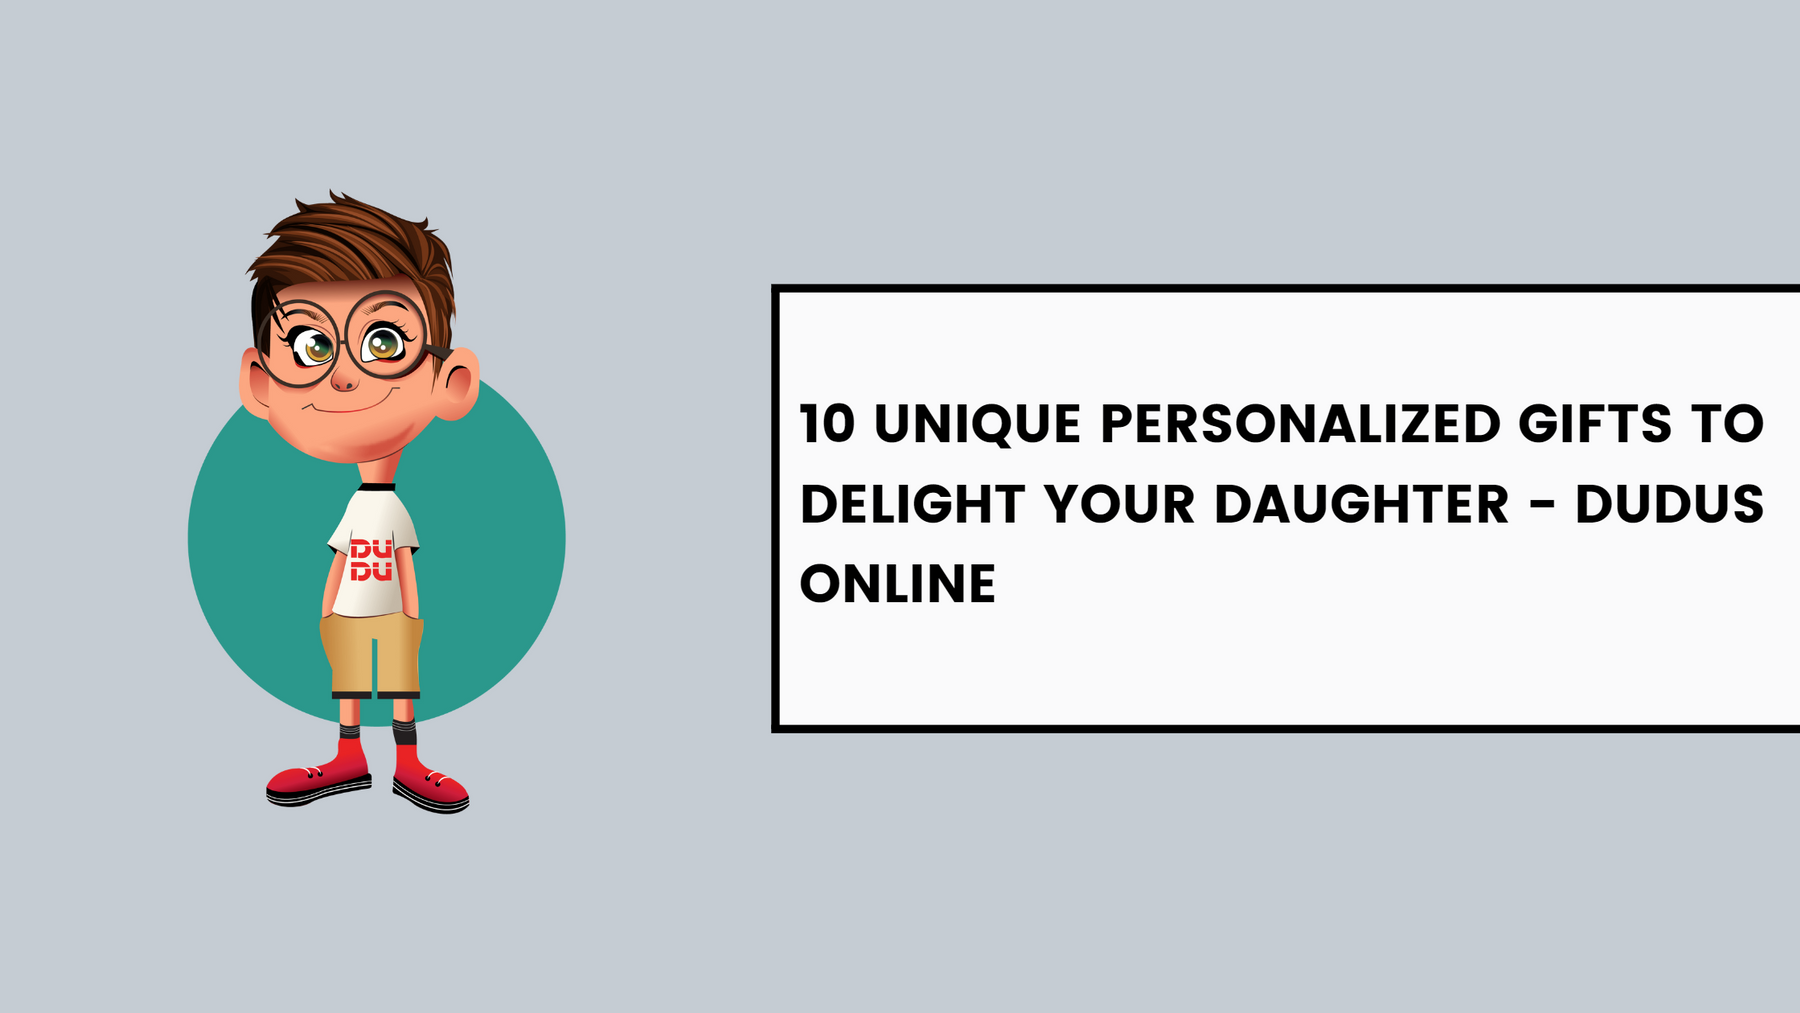 10 Unique Personalized Gifts to Delight Your Daughter - Dudus Online